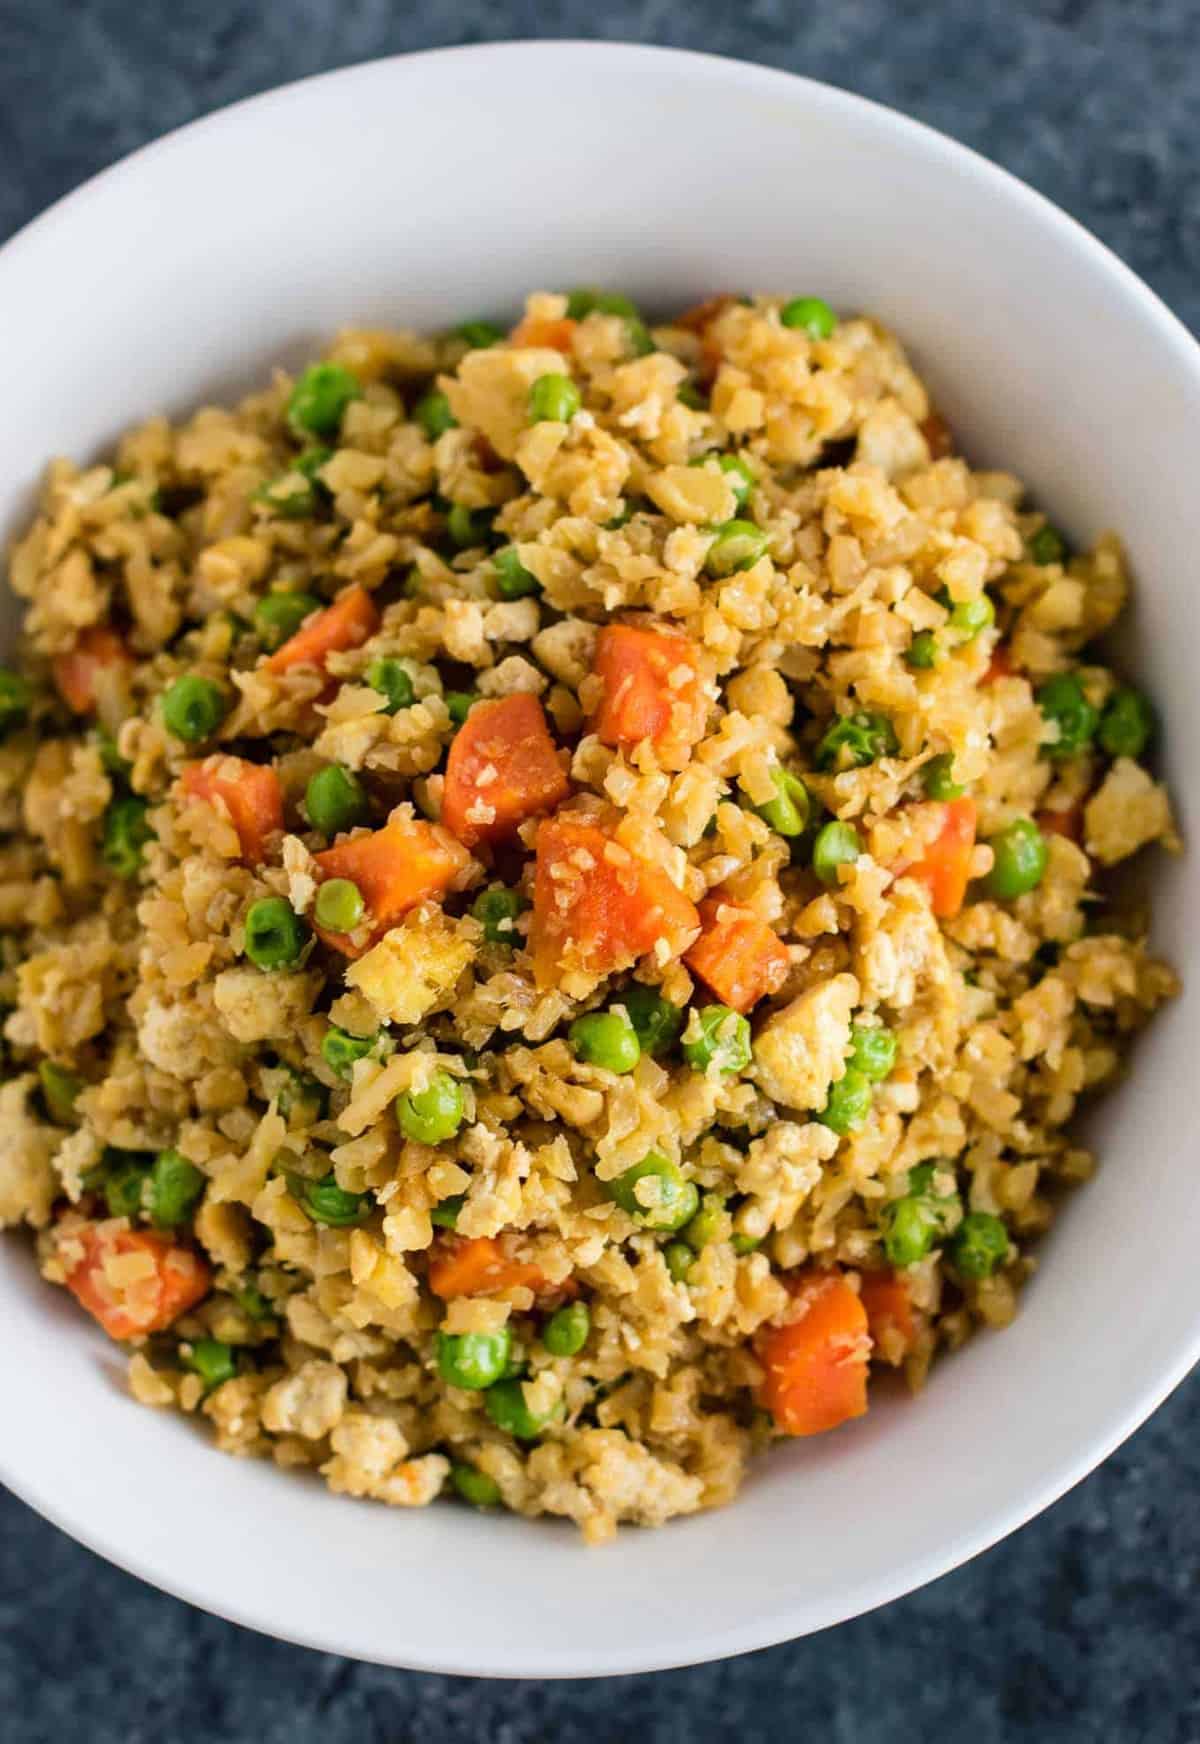 This cauliflower tofu fried rice is vegan, gluten free, grain free, and low carb. You won't believe this doesn't have rice or eggs in it! My new favorite dinner recipe! #grainfree #glutenfree #cauliflowerfriedrice #tofufriedrice #vegan #dinner #eggfree